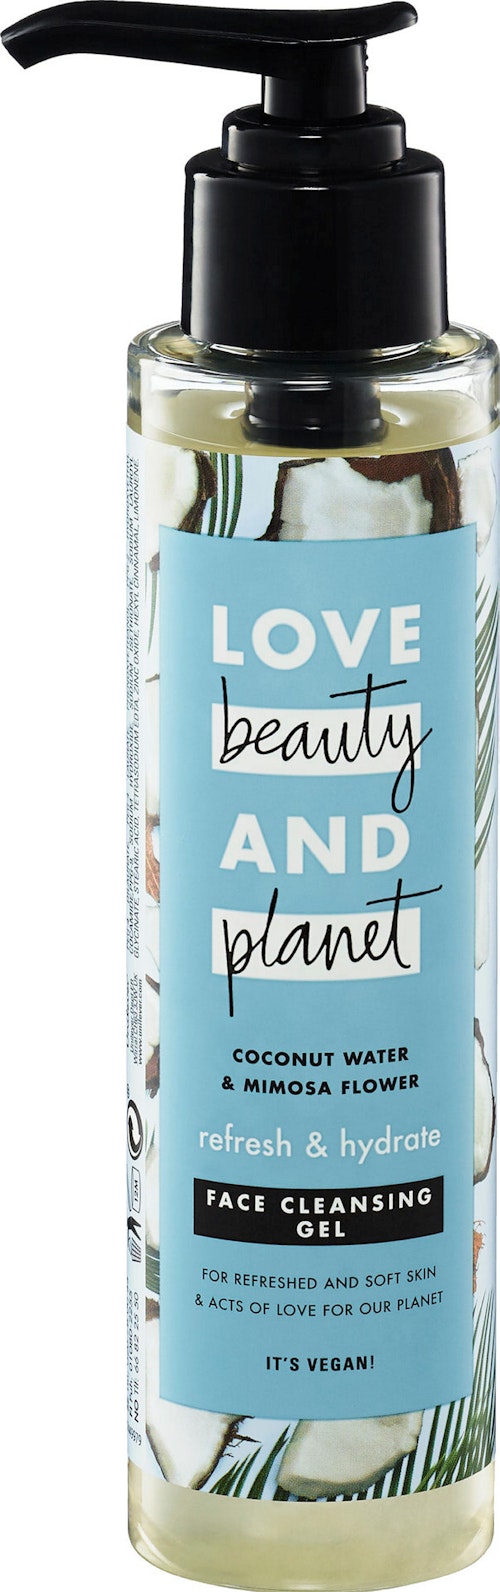 Love Beauty & Planet Refresh and Hydrate Face Cleansing Gel